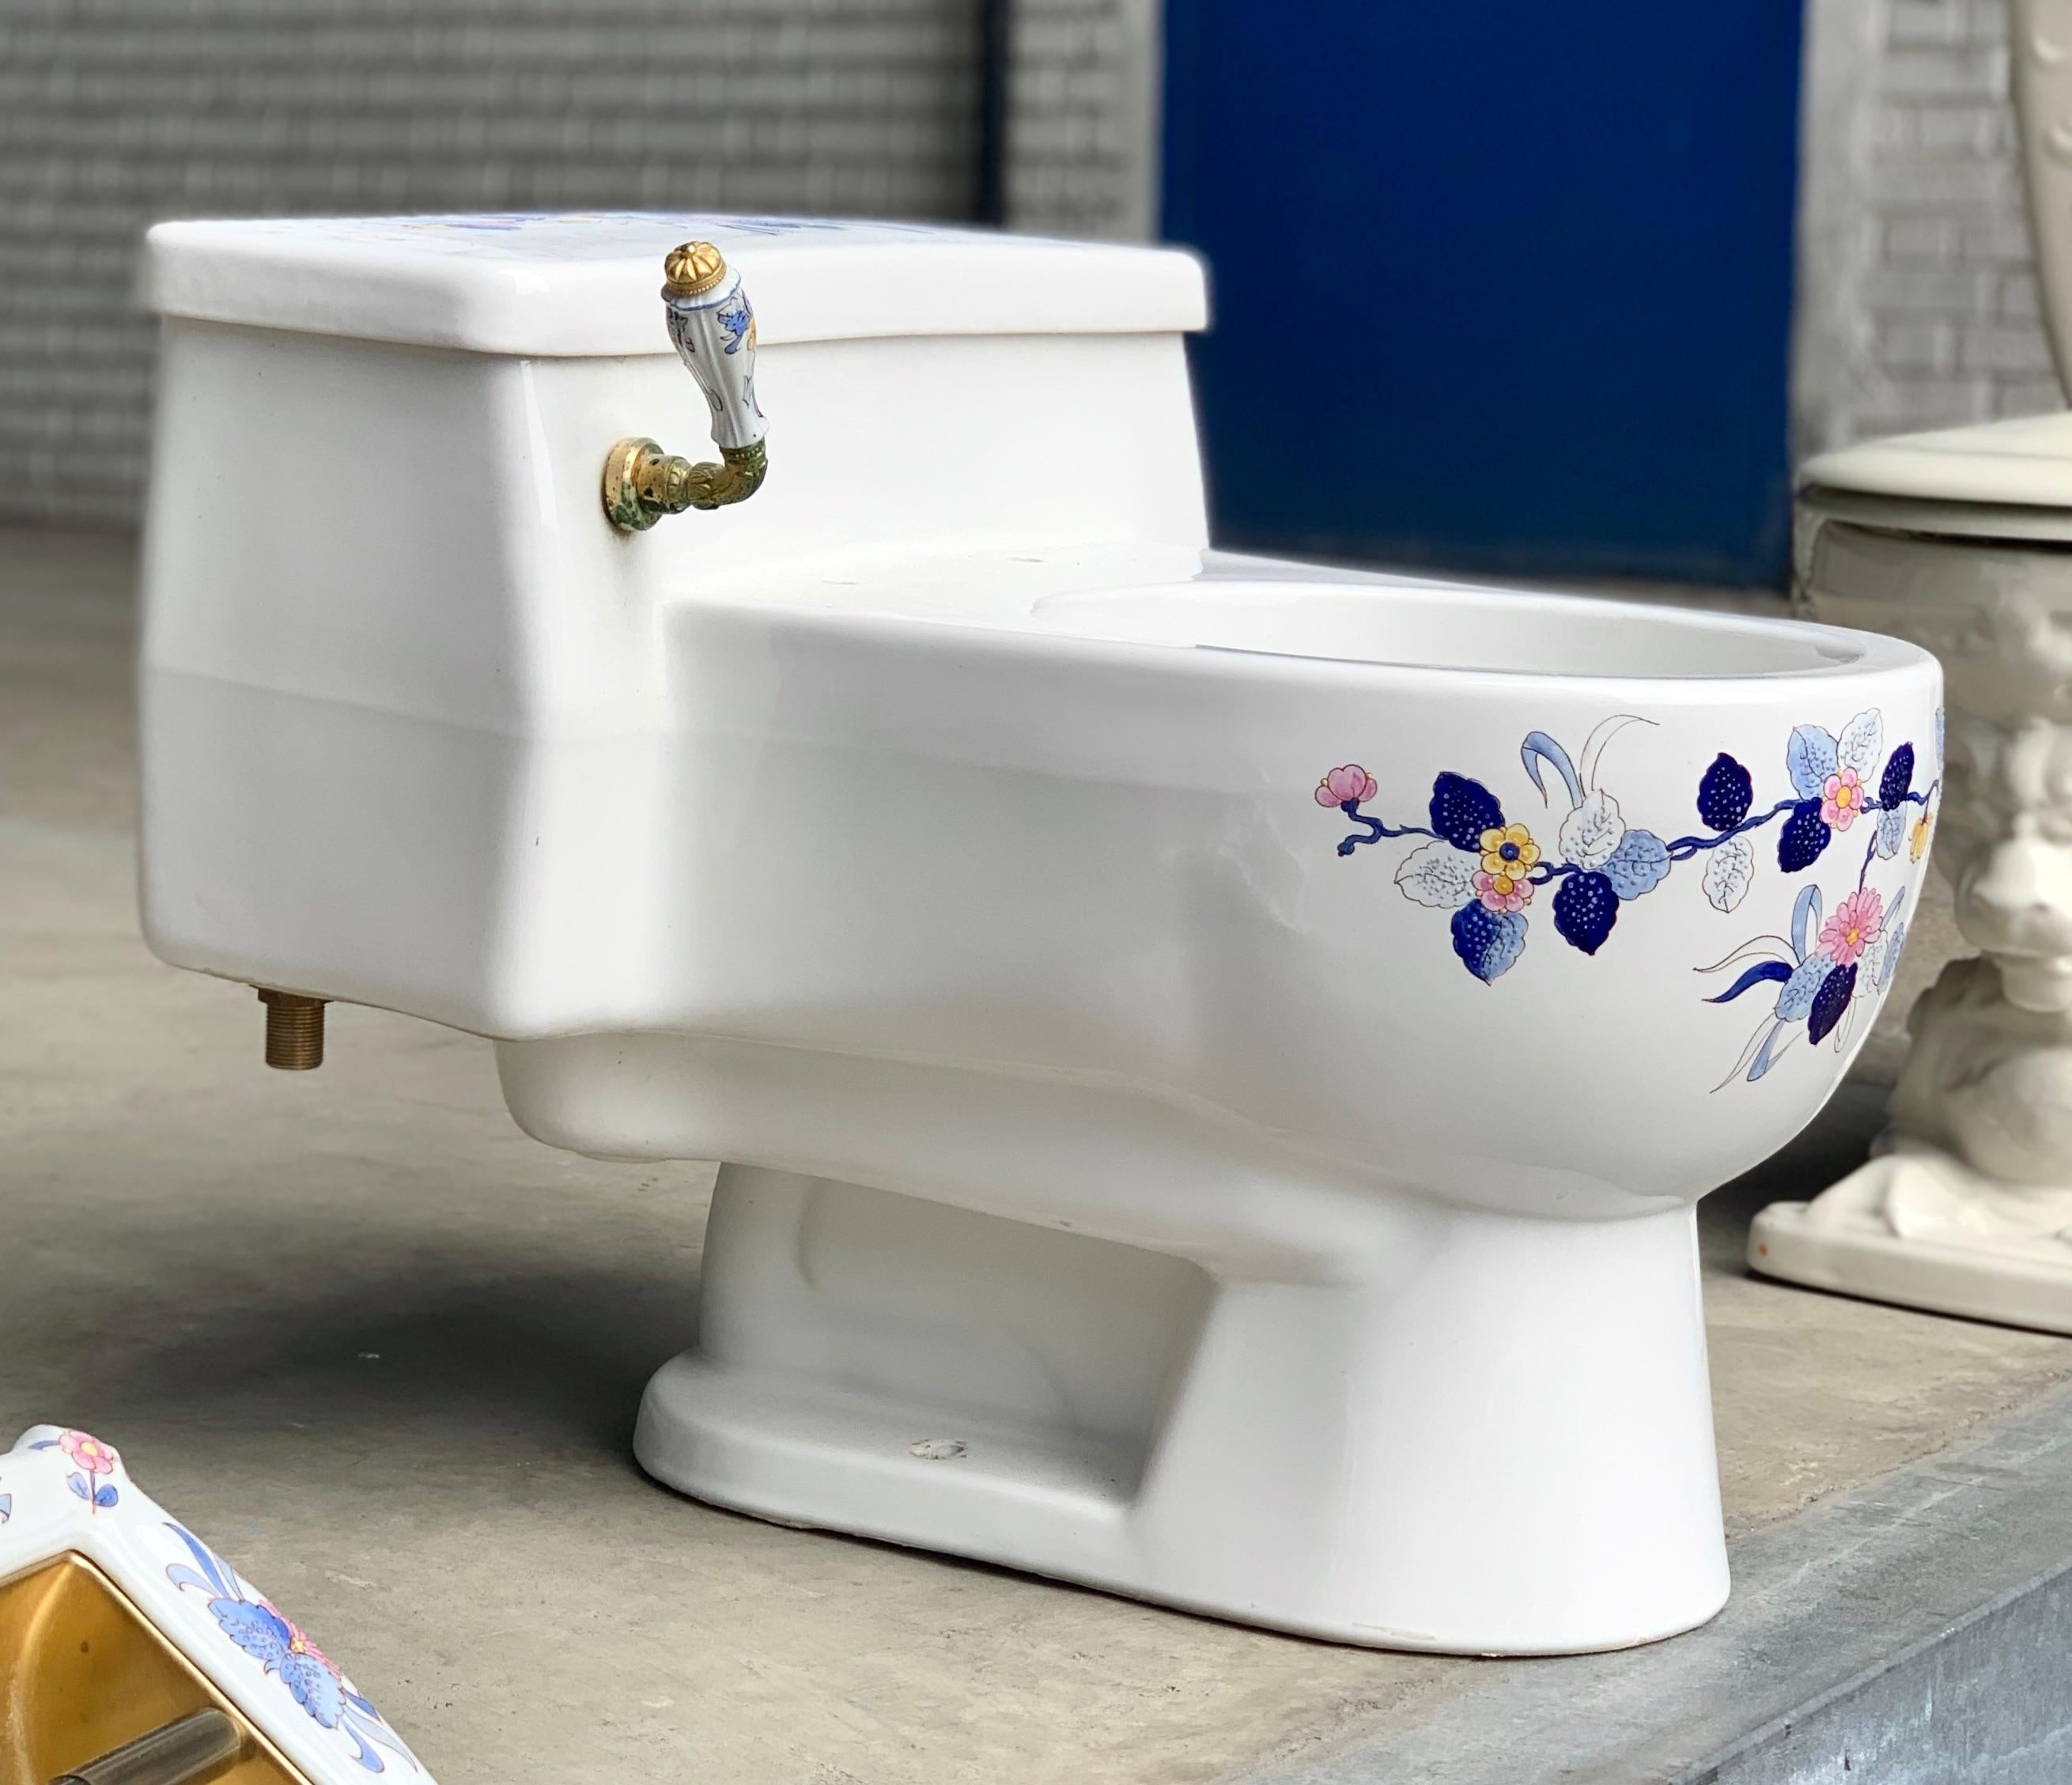 Hand painted Sherle Wagner porcelain chinoiserie ‘Blue Mum’ toilet, water closet. Blue mum pattern still available at Sherle Wagner but this gorgeous sculptural low-slung one piece toilet form is no longer in production. Comes with original gold